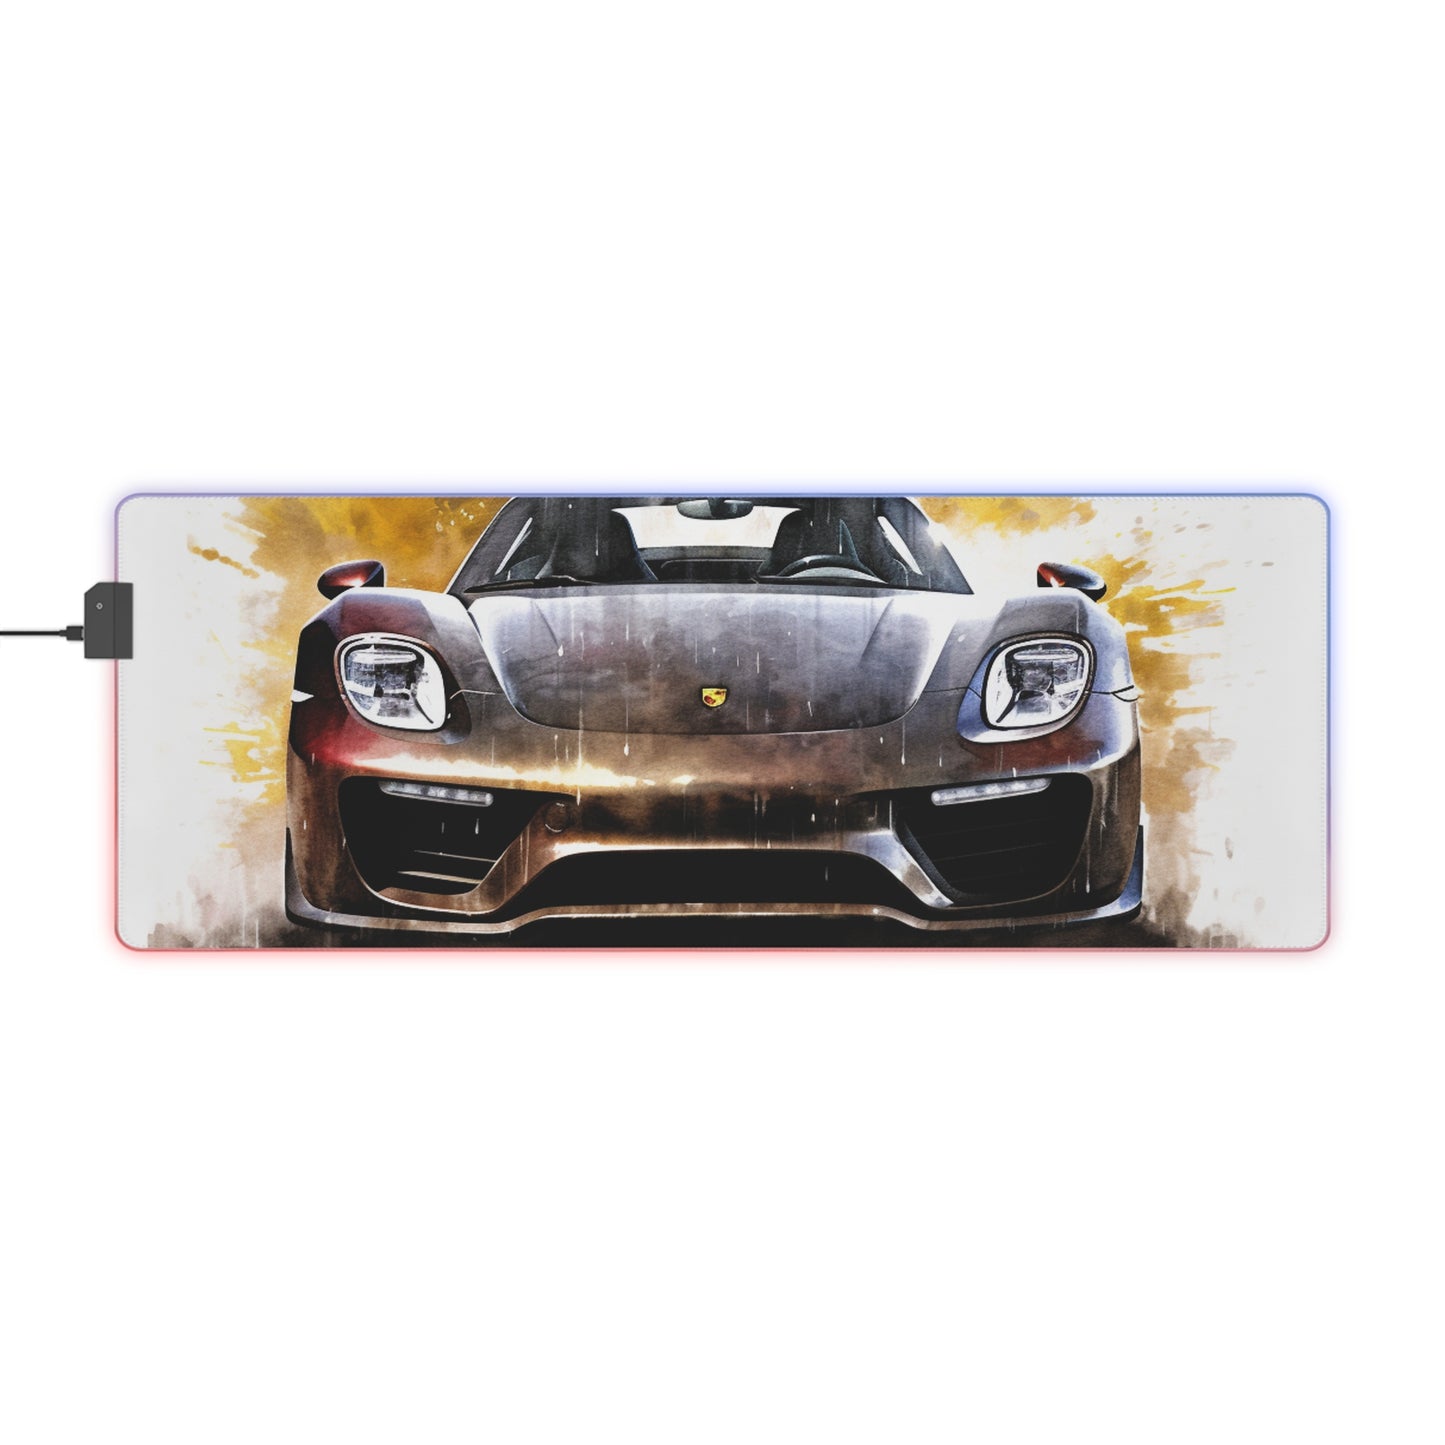 LED Gaming Mouse Pad 918 Spyder white background driving fast with water splashing 1